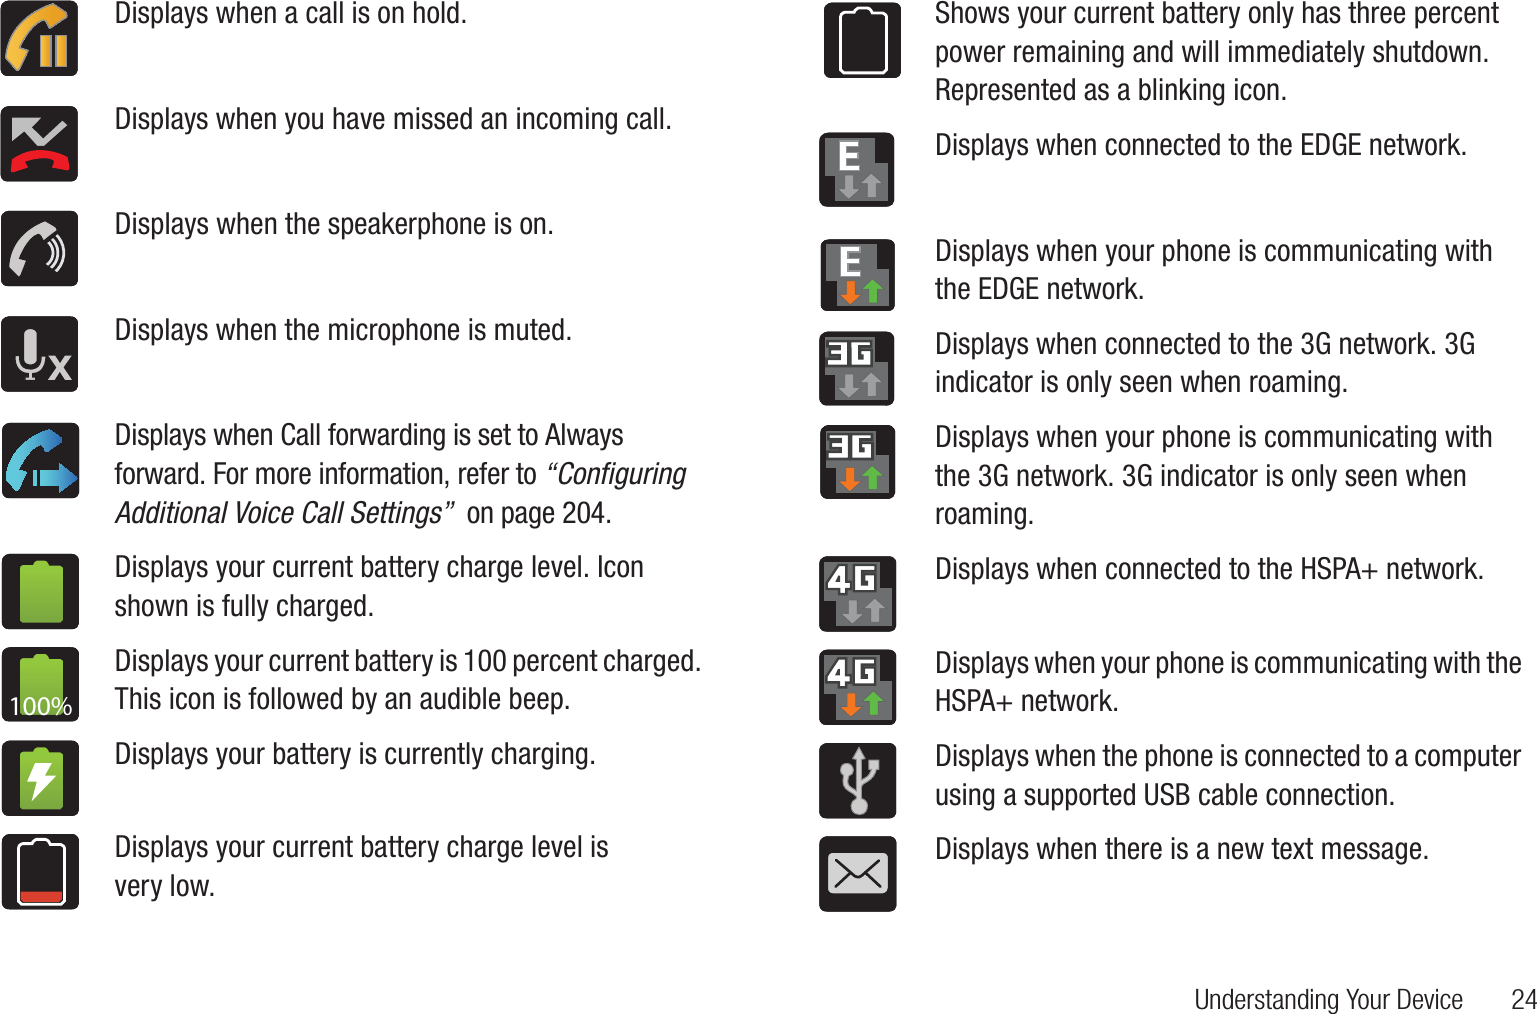 Understanding Your Device       24Displays when a call is on hold.Displays when you have missed an incoming call.Displays when the speakerphone is on.Displays when the microphone is muted.Displays when Call forwarding is set to Always forward. For more information, refer to “Configuring Additional Voice Call Settings”  on page 204.Displays your current battery charge level. Icon shown is fully charged.Displays your current battery is 100 percent charged. This icon is followed by an audible beep.Displays your battery is currently charging.Displays your current battery charge level is very low.100%Shows your current battery only has three percent power remaining and will immediately shutdown. Represented as a blinking icon.Displays when connected to the EDGE network.Displays when your phone is communicating with the EDGE network.Displays when connected to the 3G network. 3G indicator is only seen when roaming.Displays when your phone is communicating with the 3G network. 3G indicator is only seen when roaming.Displays when connected to the HSPA+ network.Displays when your phone is communicating with the HSPA+ network.Displays when the phone is connected to a computer using a supported USB cable connection.Displays when there is a new text message.